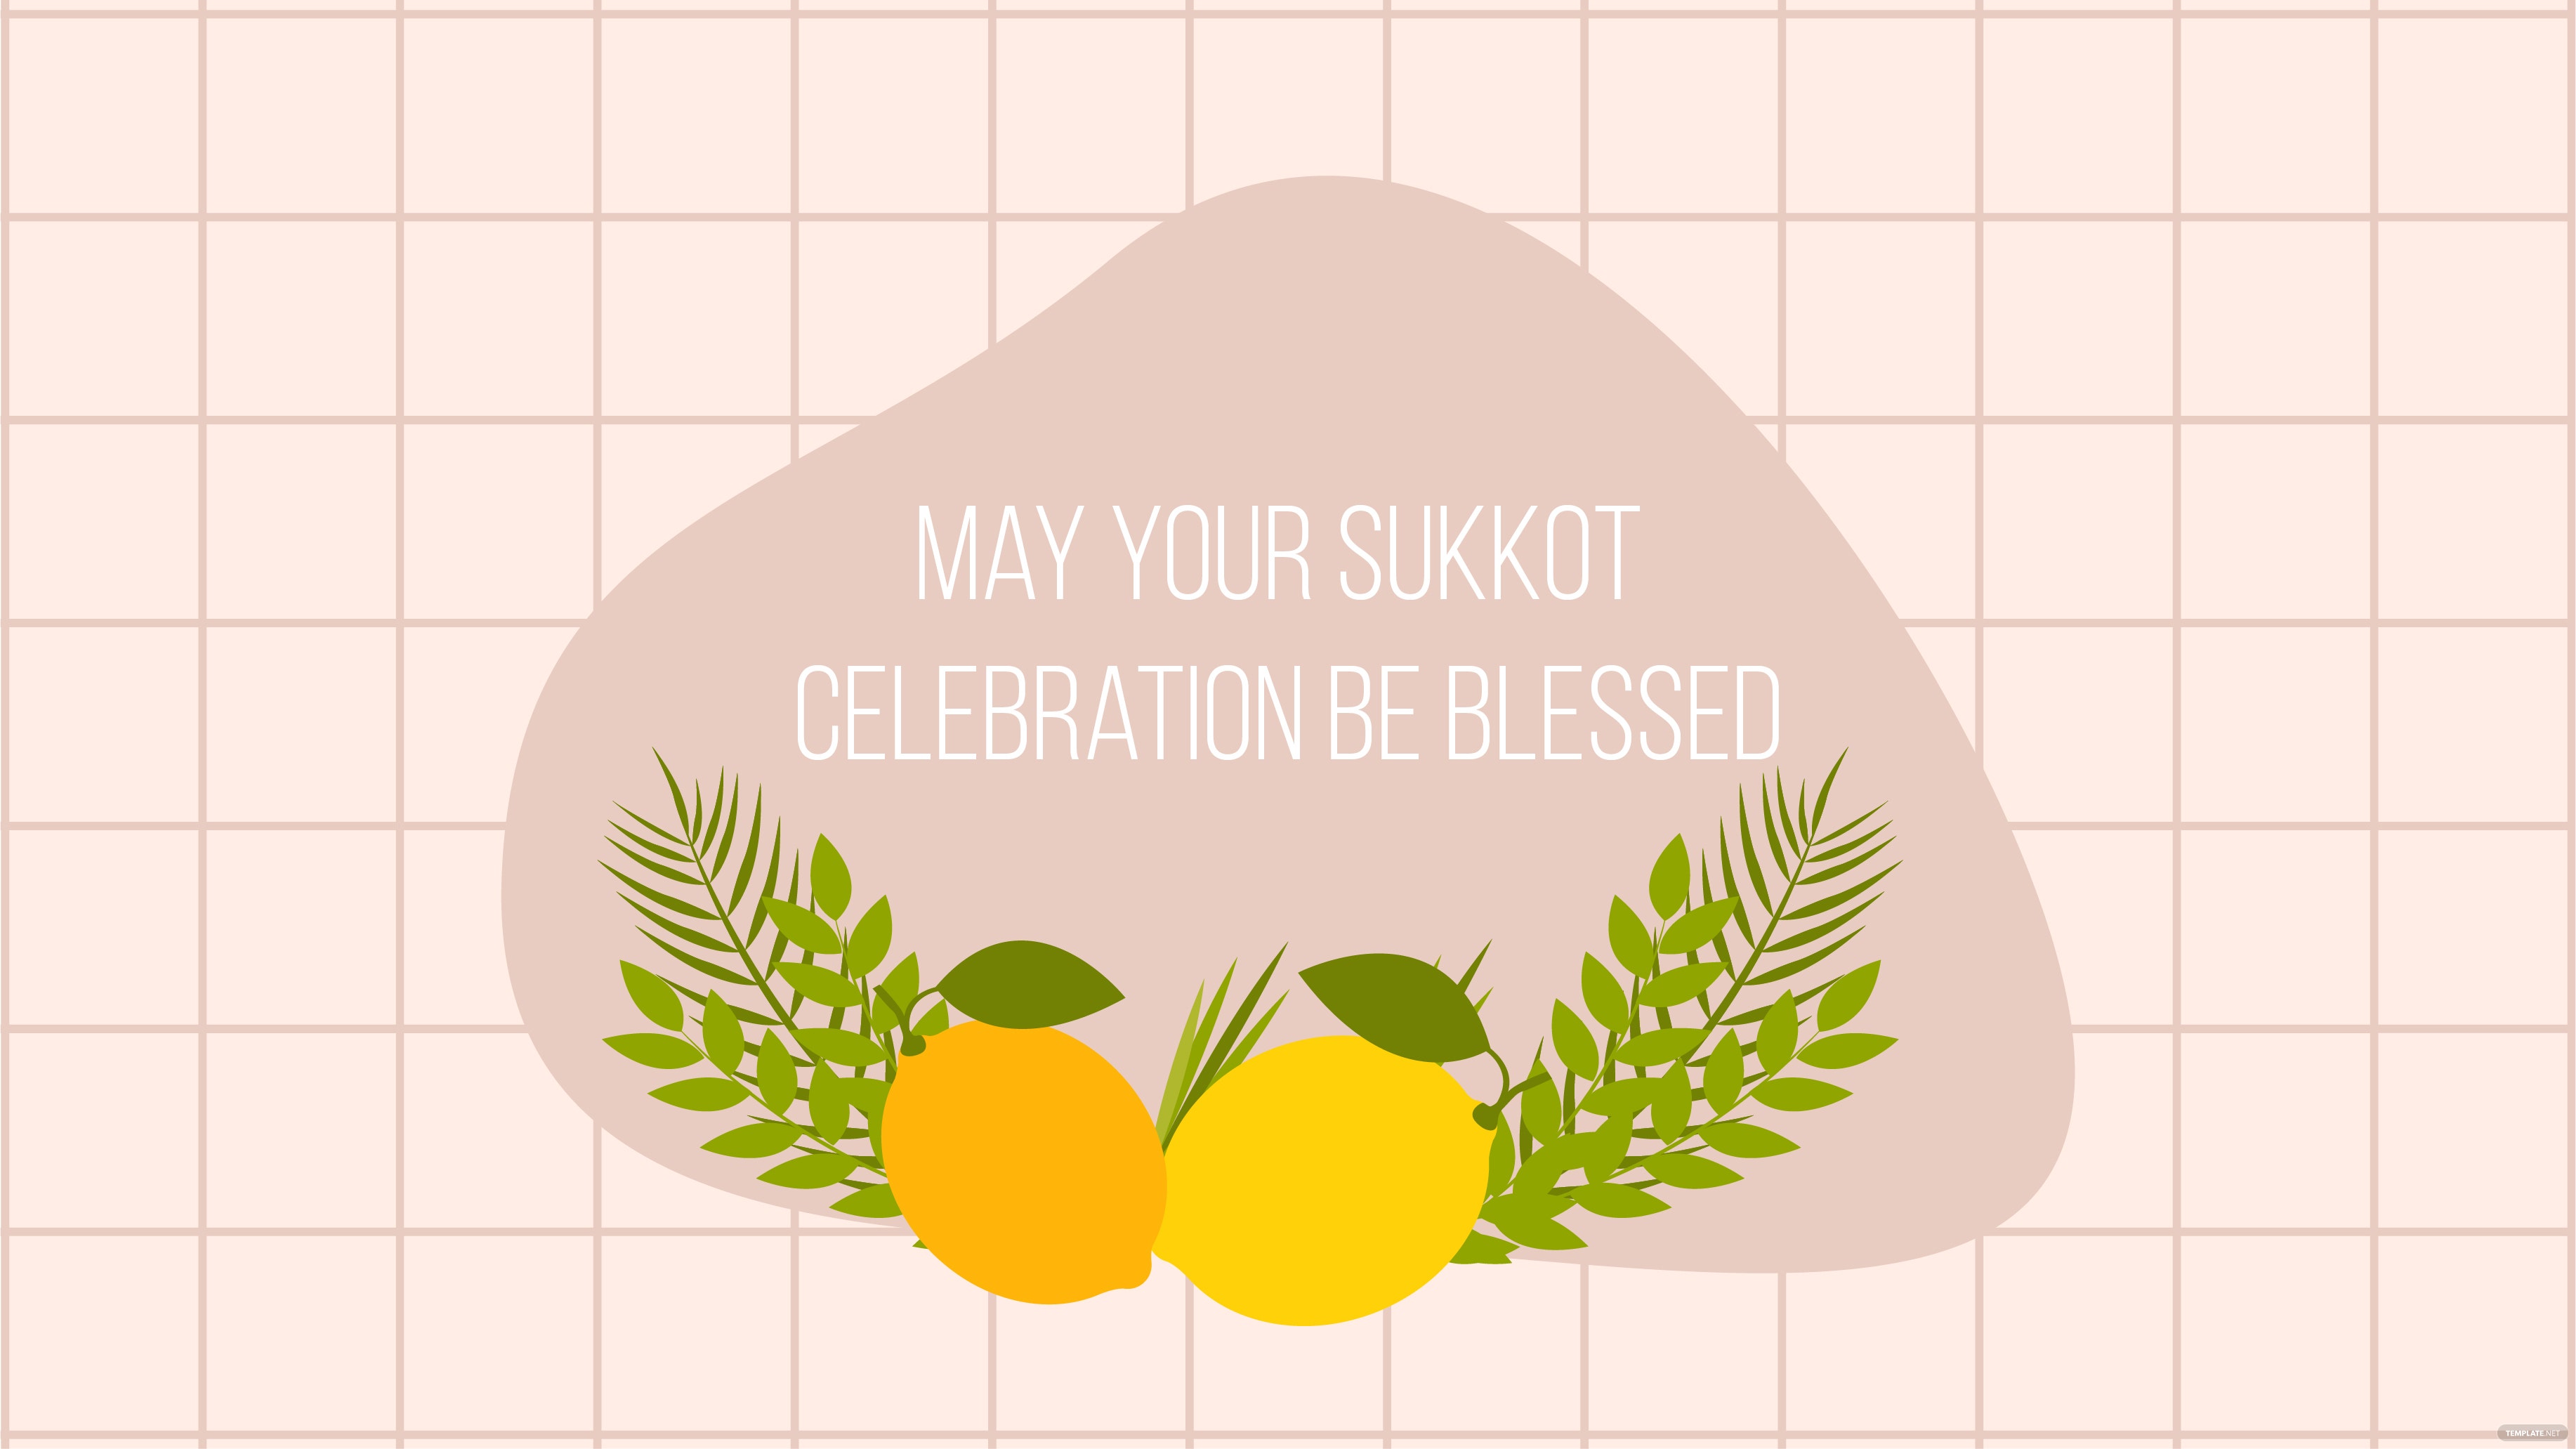 sukkot wishes background ideas and examples